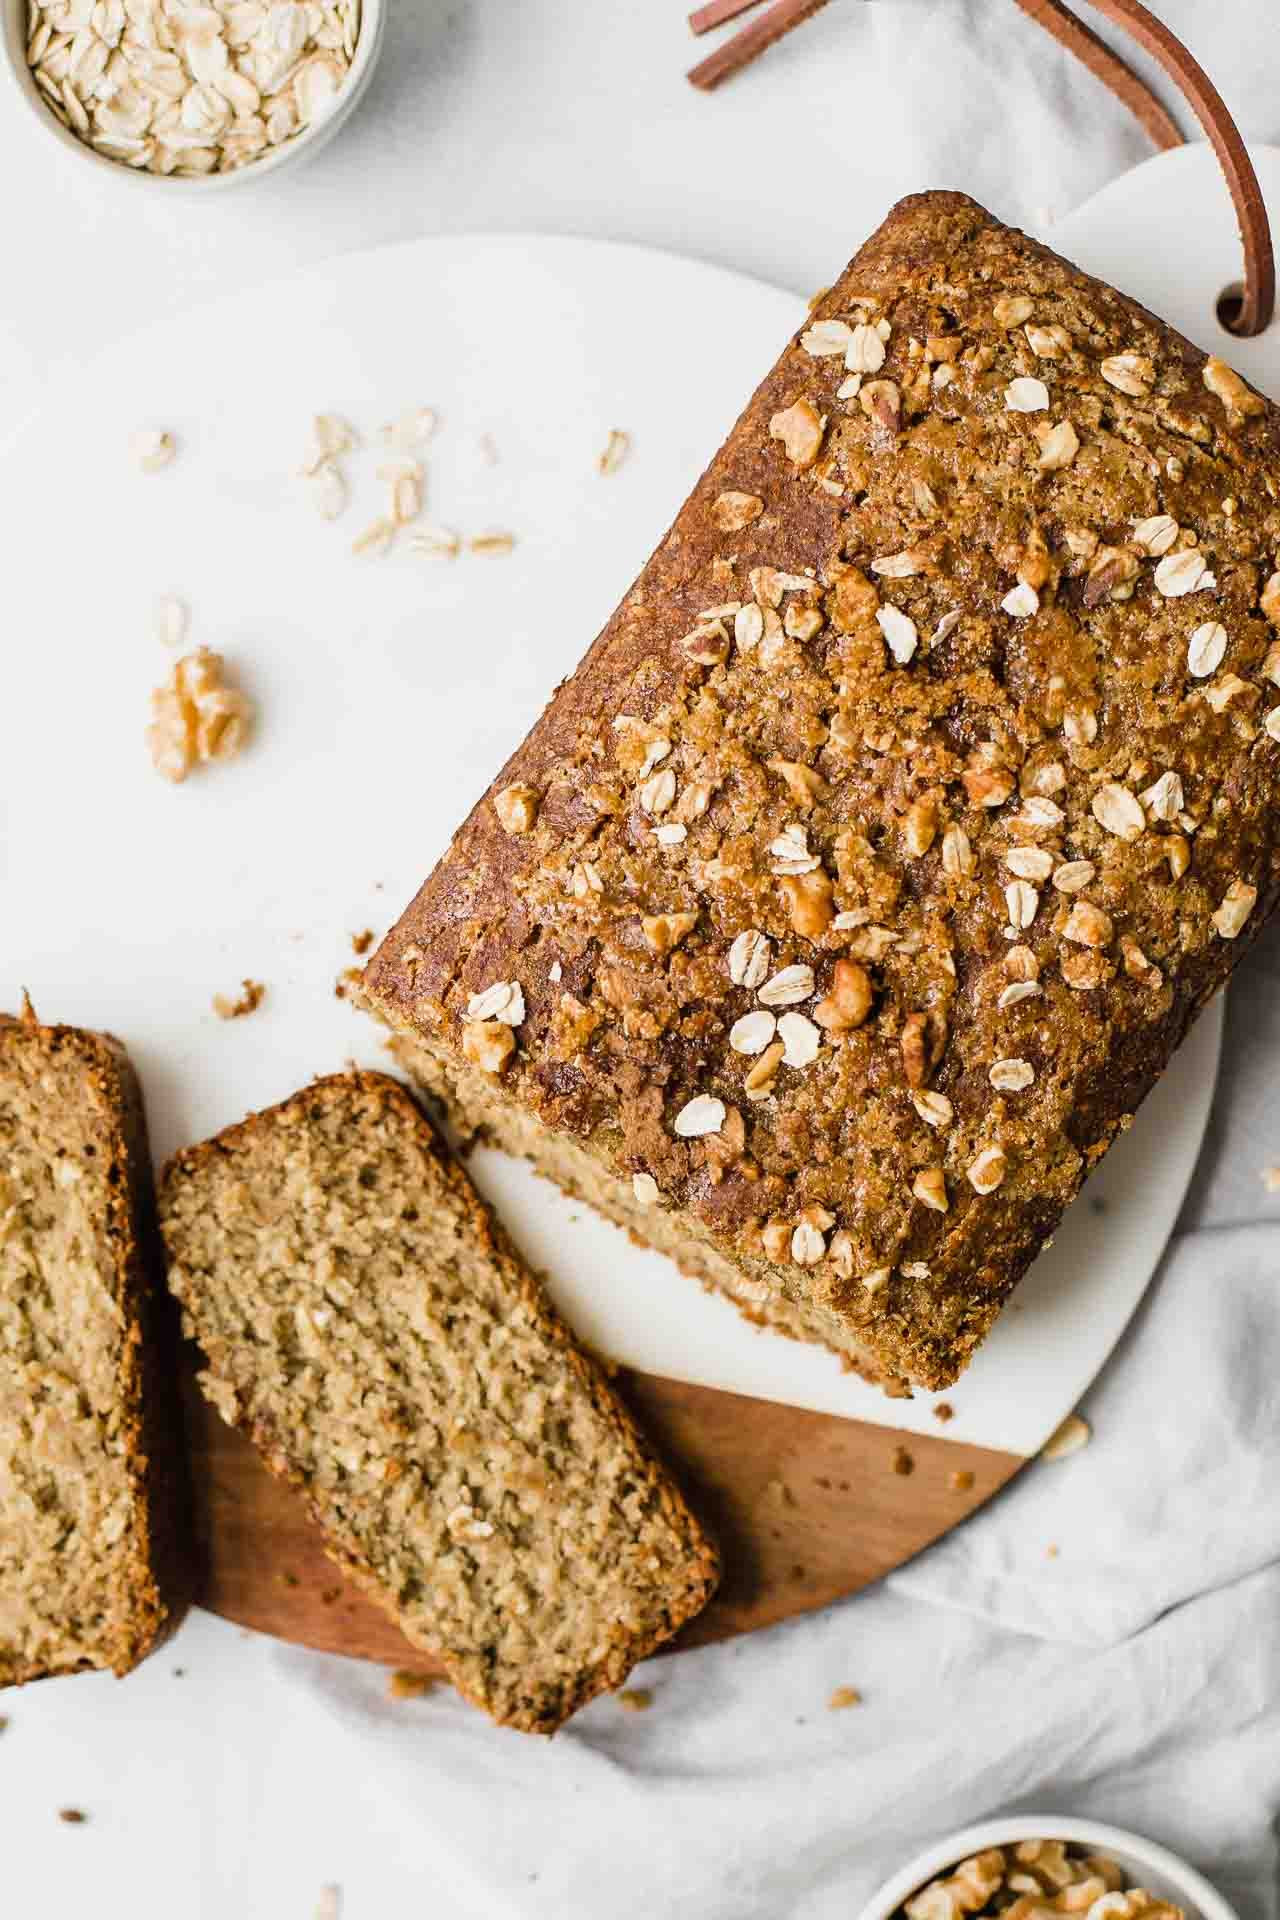 Gourmet Banana Bread
 This Simple Healthy Banana Bread Recipe is the BEST Easy